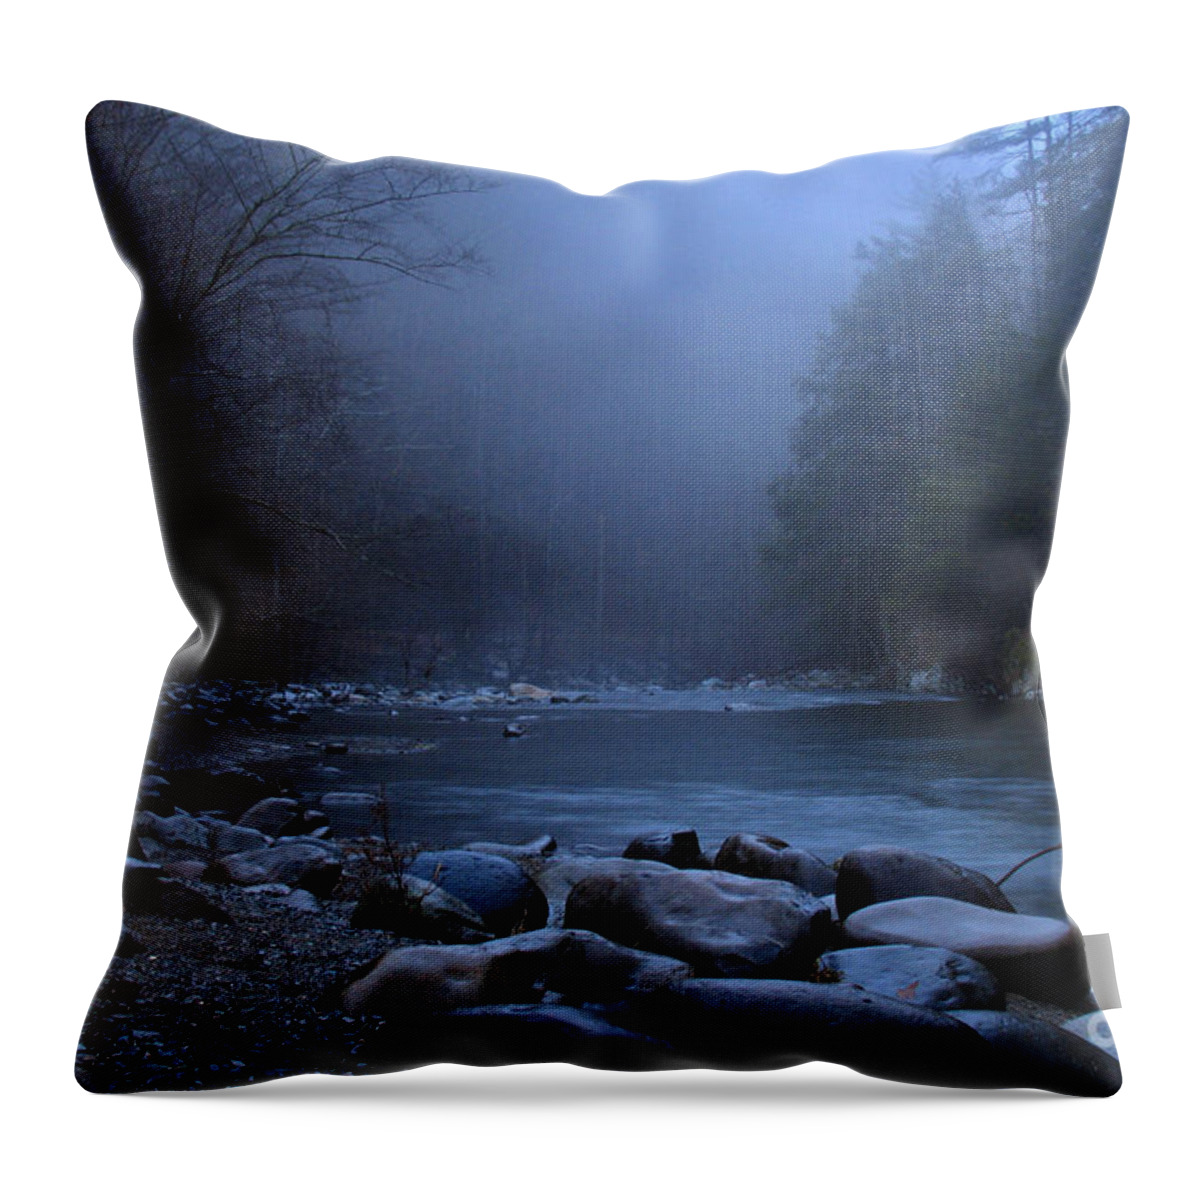  Throw Pillow featuring the photograph Dusk in The Smokies by Douglas Stucky